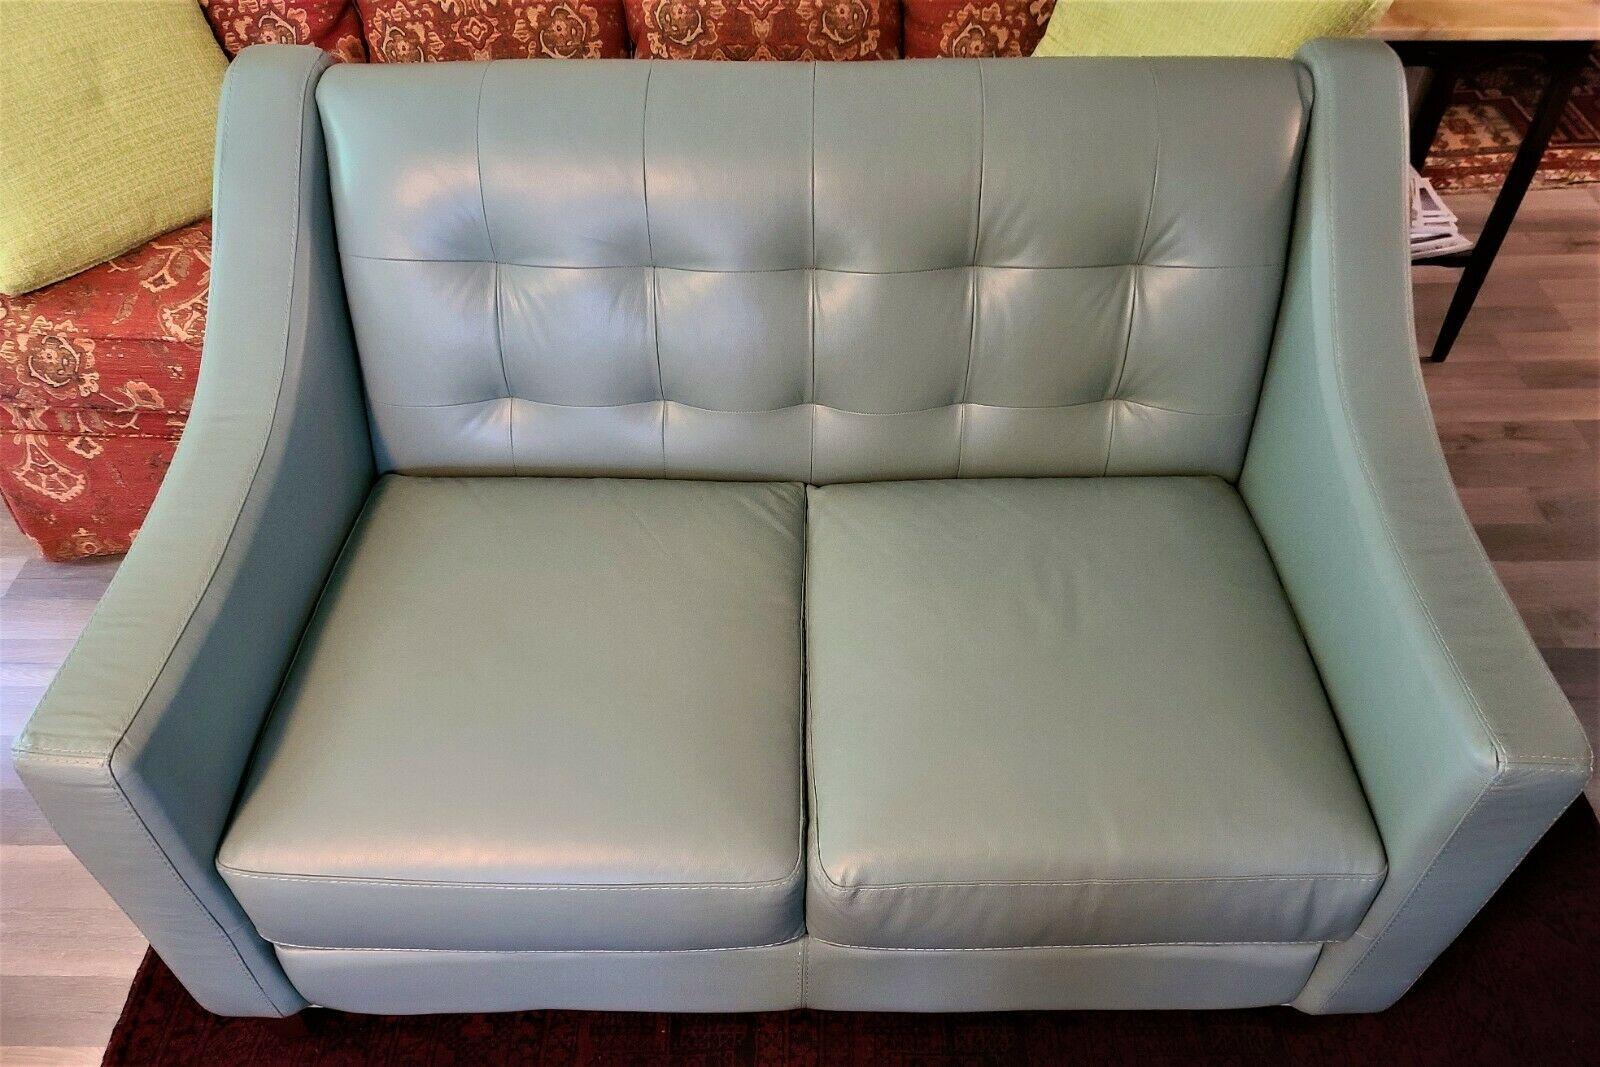 For FULL item description be sure to click on CONTINUE READING at the bottom of this listing.

Offering One Of Our Recent Palm Beach Estate Fine Furniture Acquisitions Of A
Chateau d'ax Tufted Real Leather Loveseat Settee Sofa

Color is a Teal